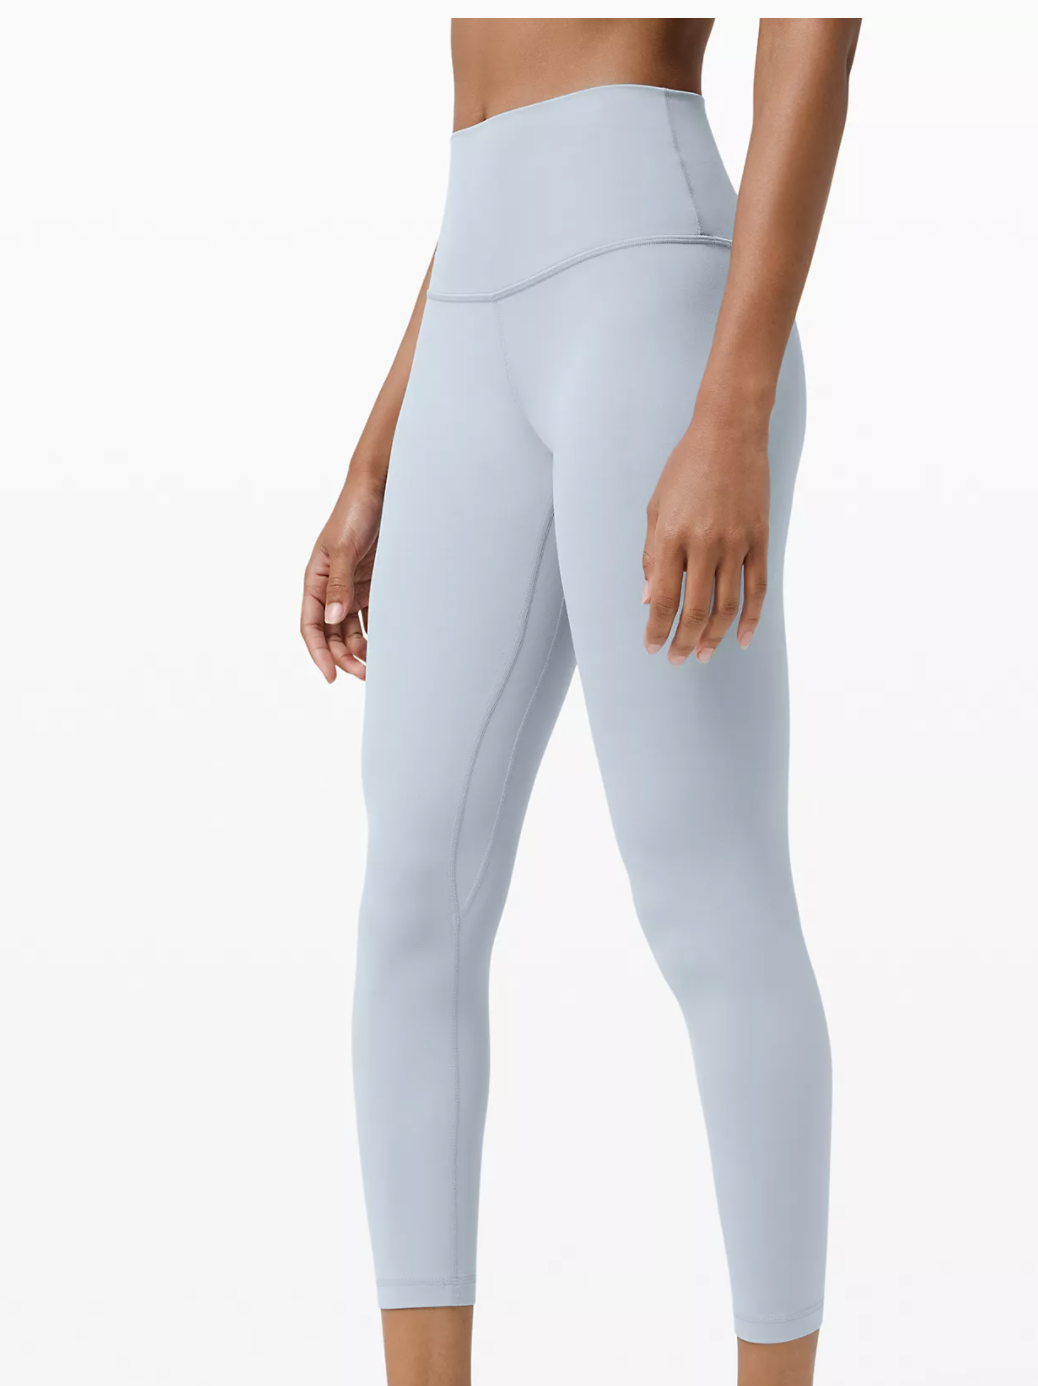 Reviews Of 14 Yoga Pants That Feel As Good As They Look